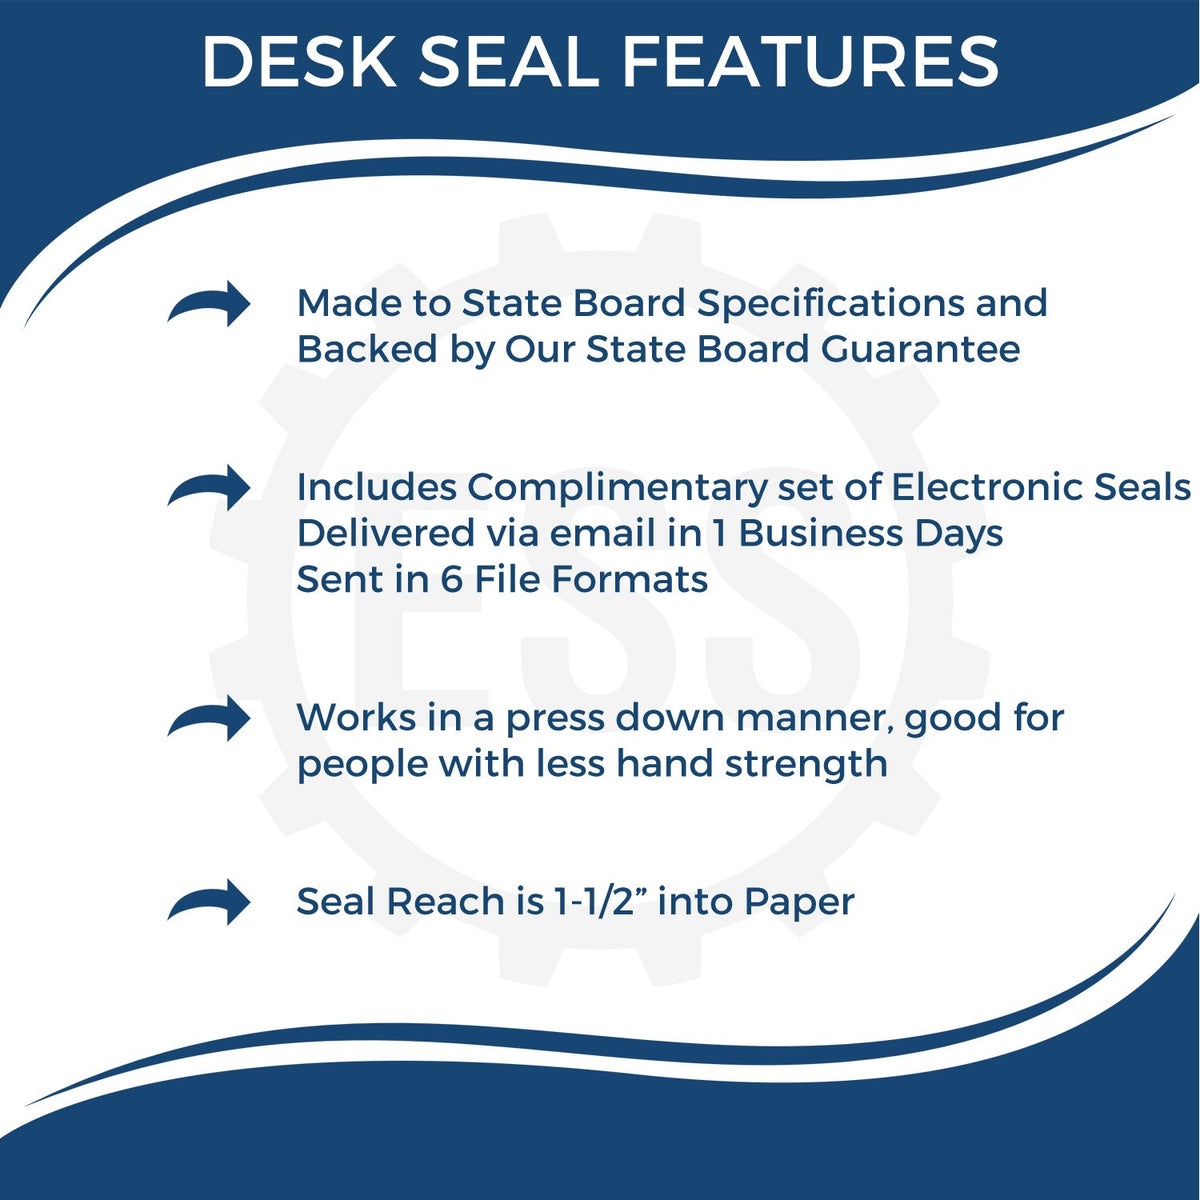 A picture of an infographic highlighting the selling points for the Washington Desk Architect Embossing Seal